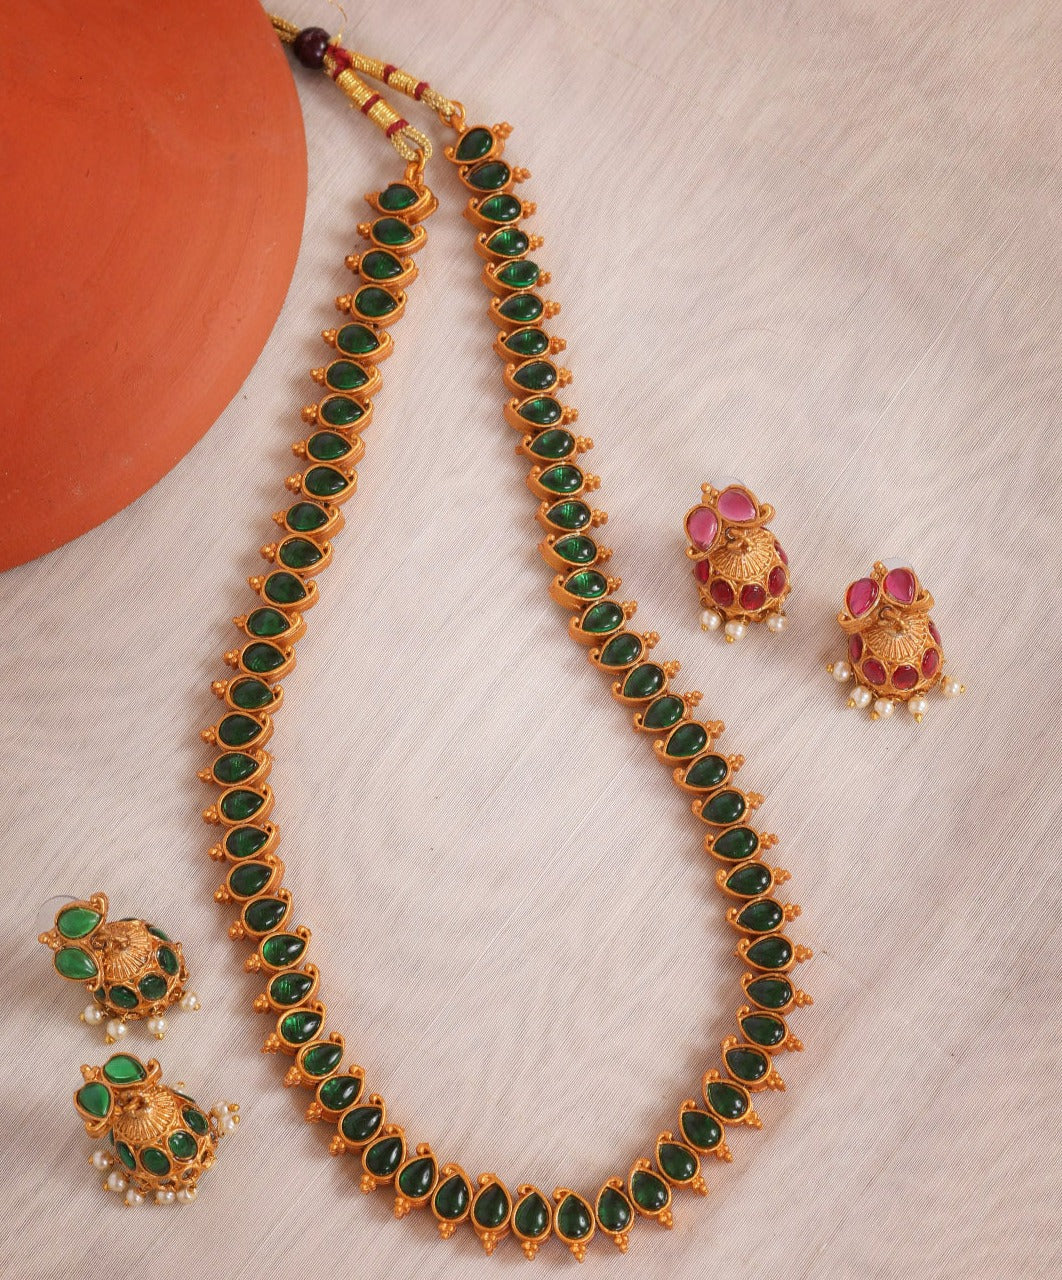 Latest Trending Design Kemp Green/Red Reversible necklace 21 inches  9020N